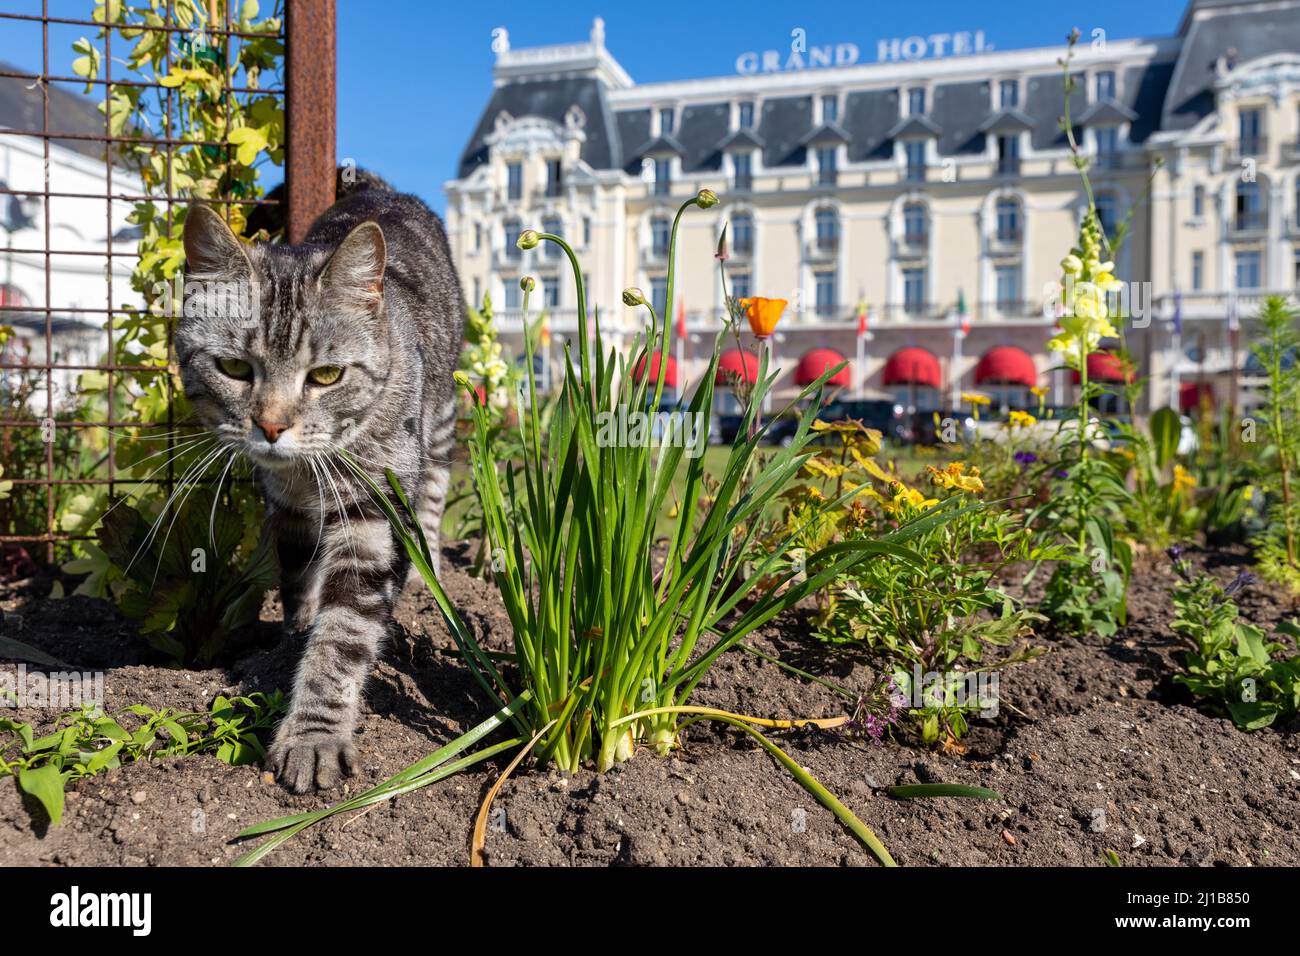 CAT IN THE GARDENS OF THE CASINO IN FONT OF THE GRAND HOTEL, CABOURG, CALVADOS, NORMANDY, FRANCE Stock Photo